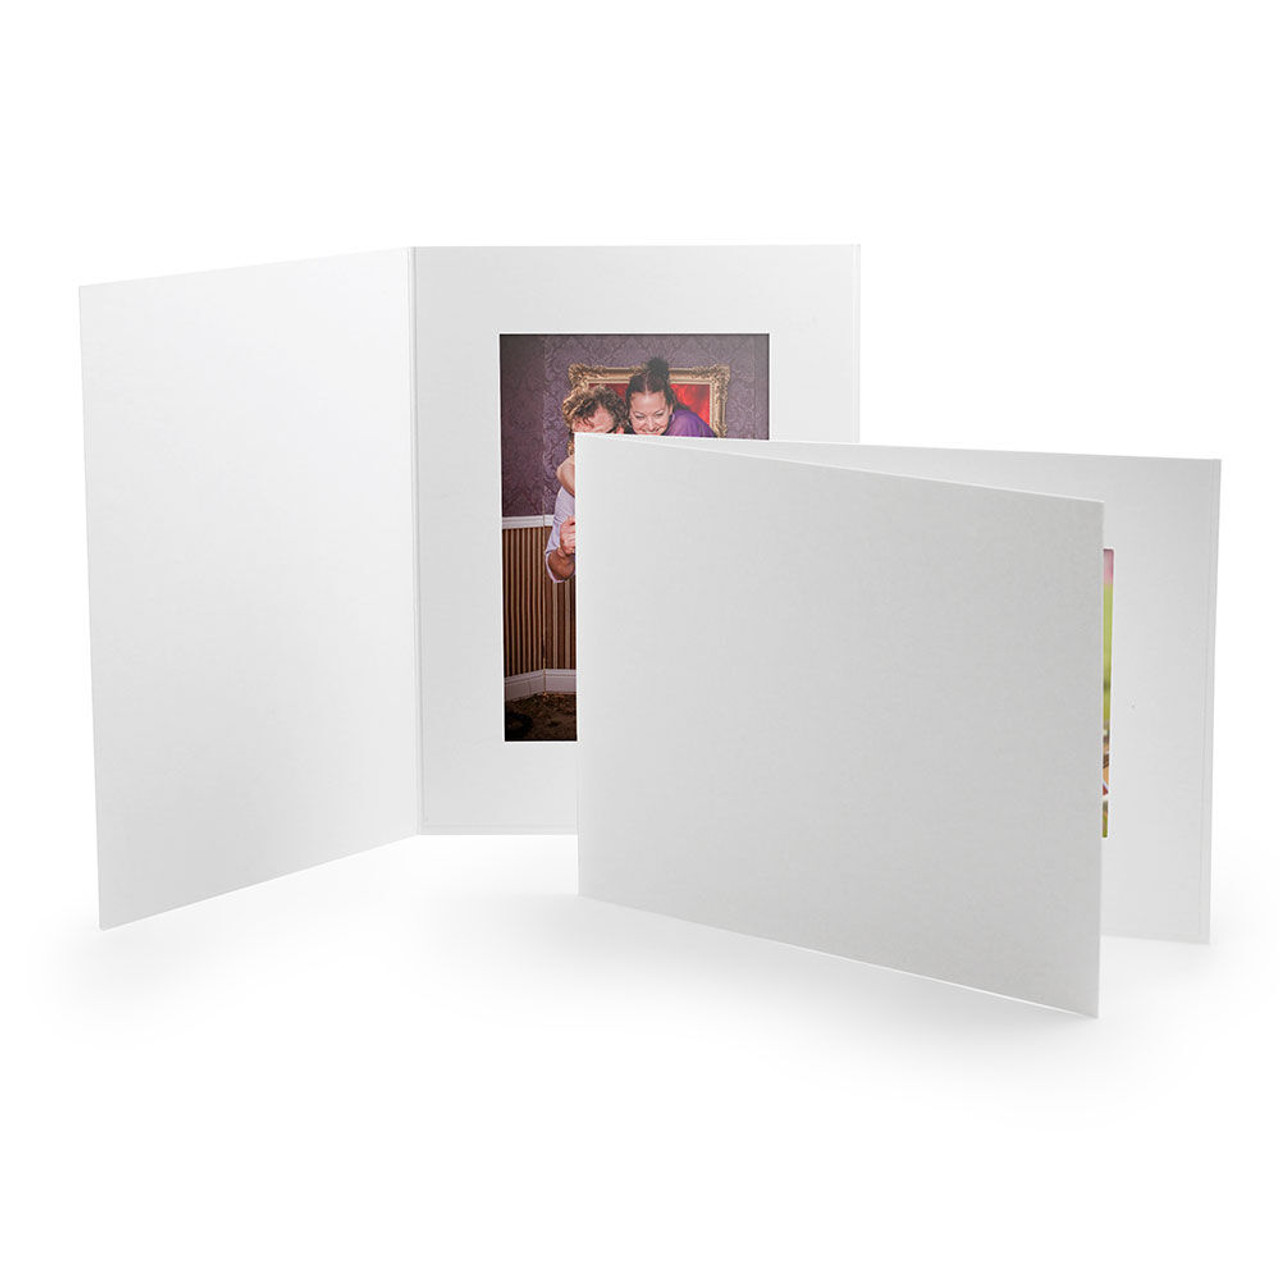 Instax Wide Photo Album for 80 Photos. Personalized / Blank. Album